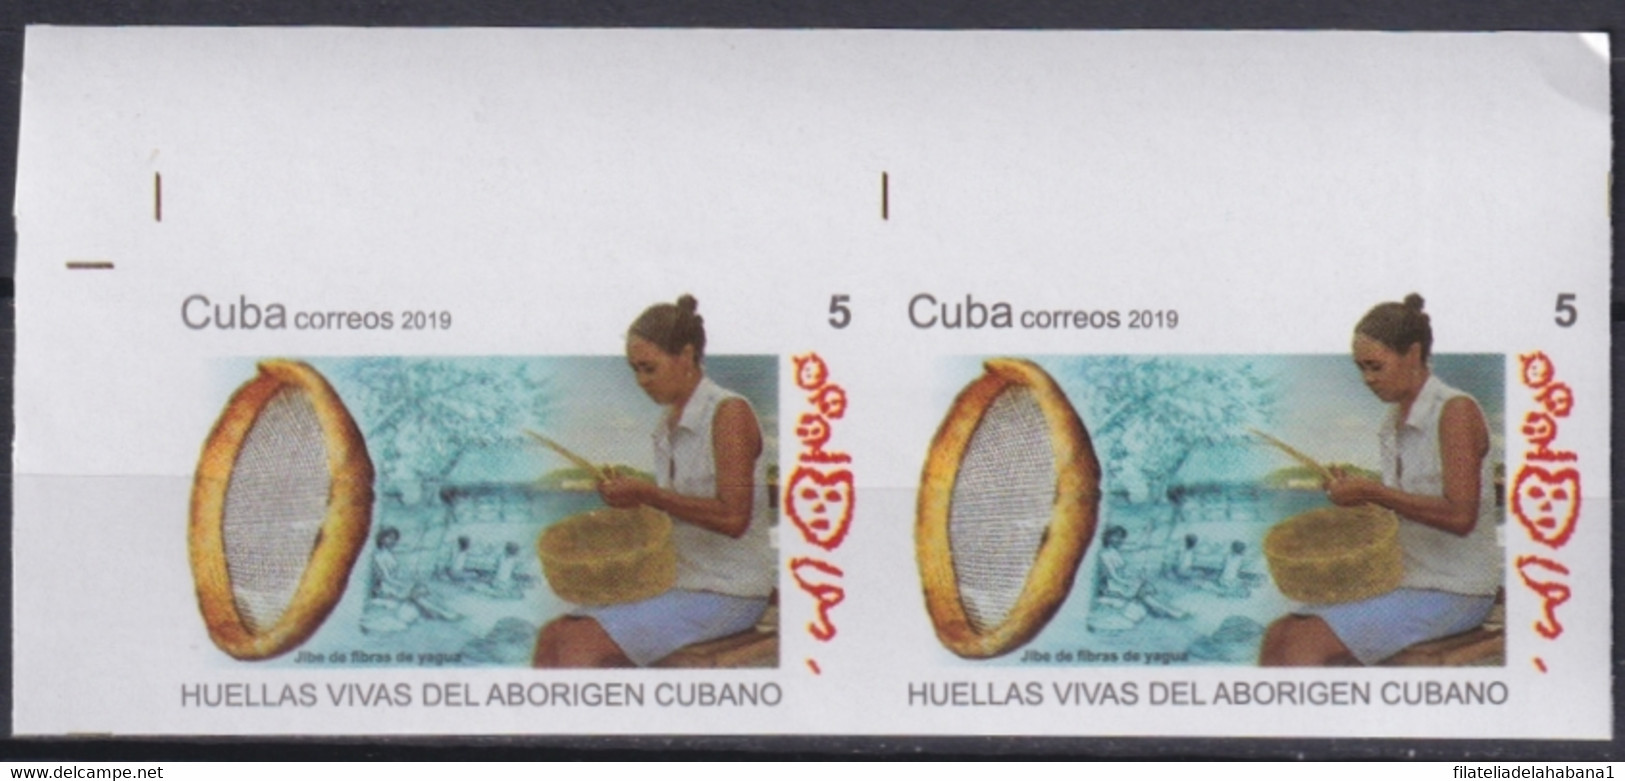 2019.221 CUBA MNH 2019 IMPERFORATED PROOF 5c INDIAN ARCHEOLOGY HUELLAS ABORIGEN. - Imperforates, Proofs & Errors